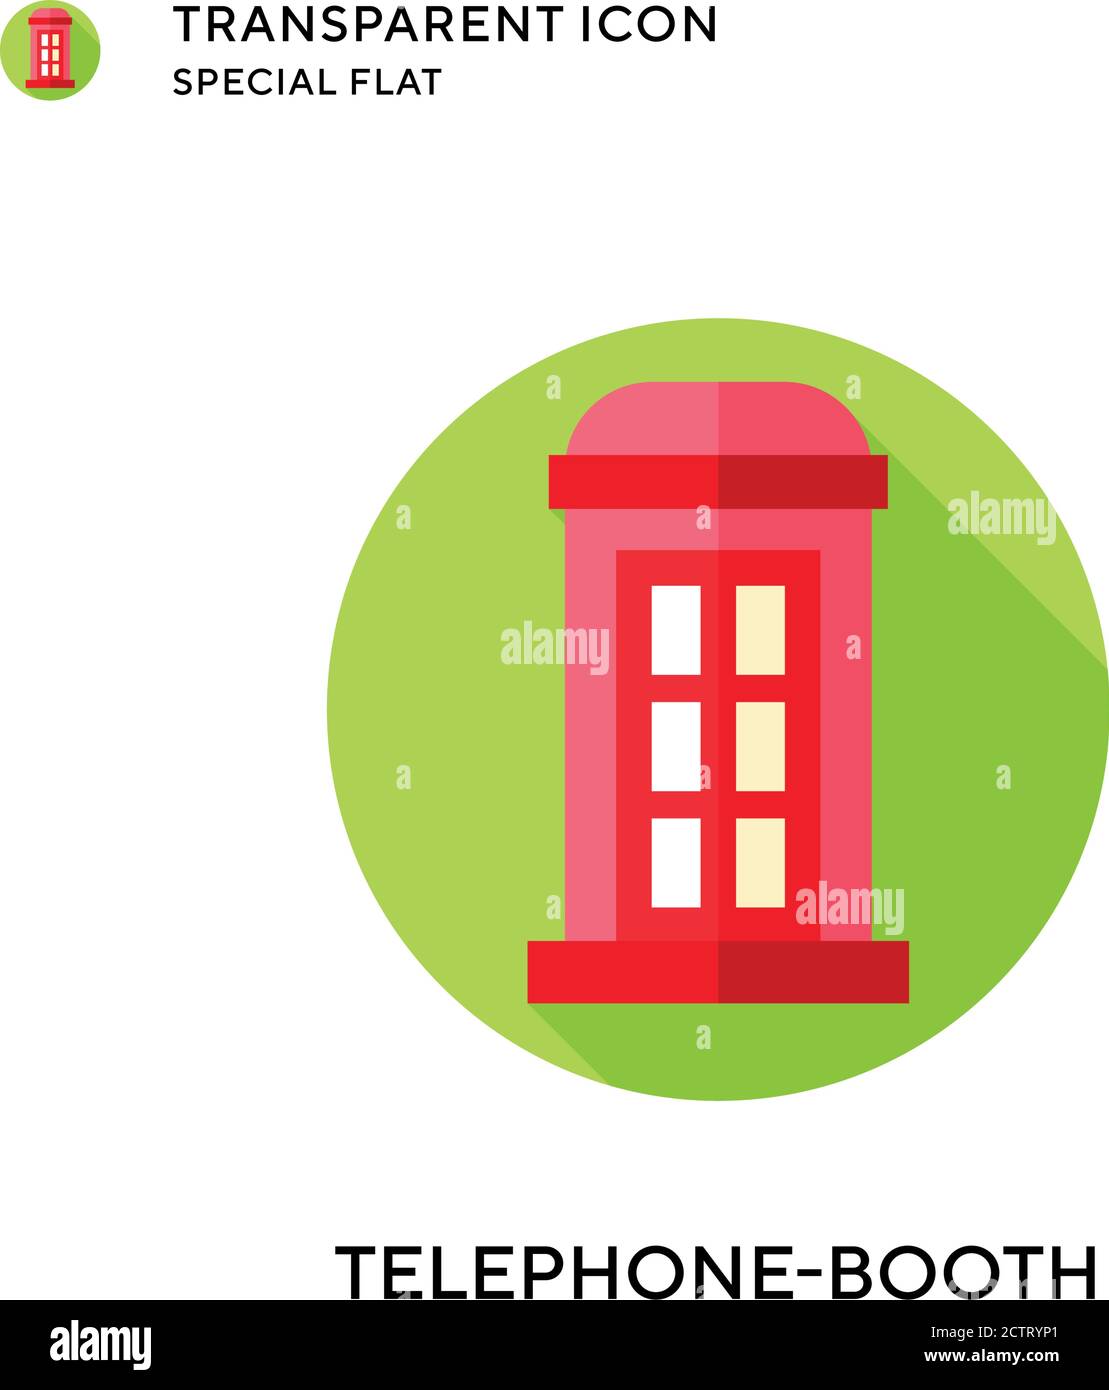 Telephone-booth vector icon. Flat style illustration. EPS 10 vector. Stock Vector